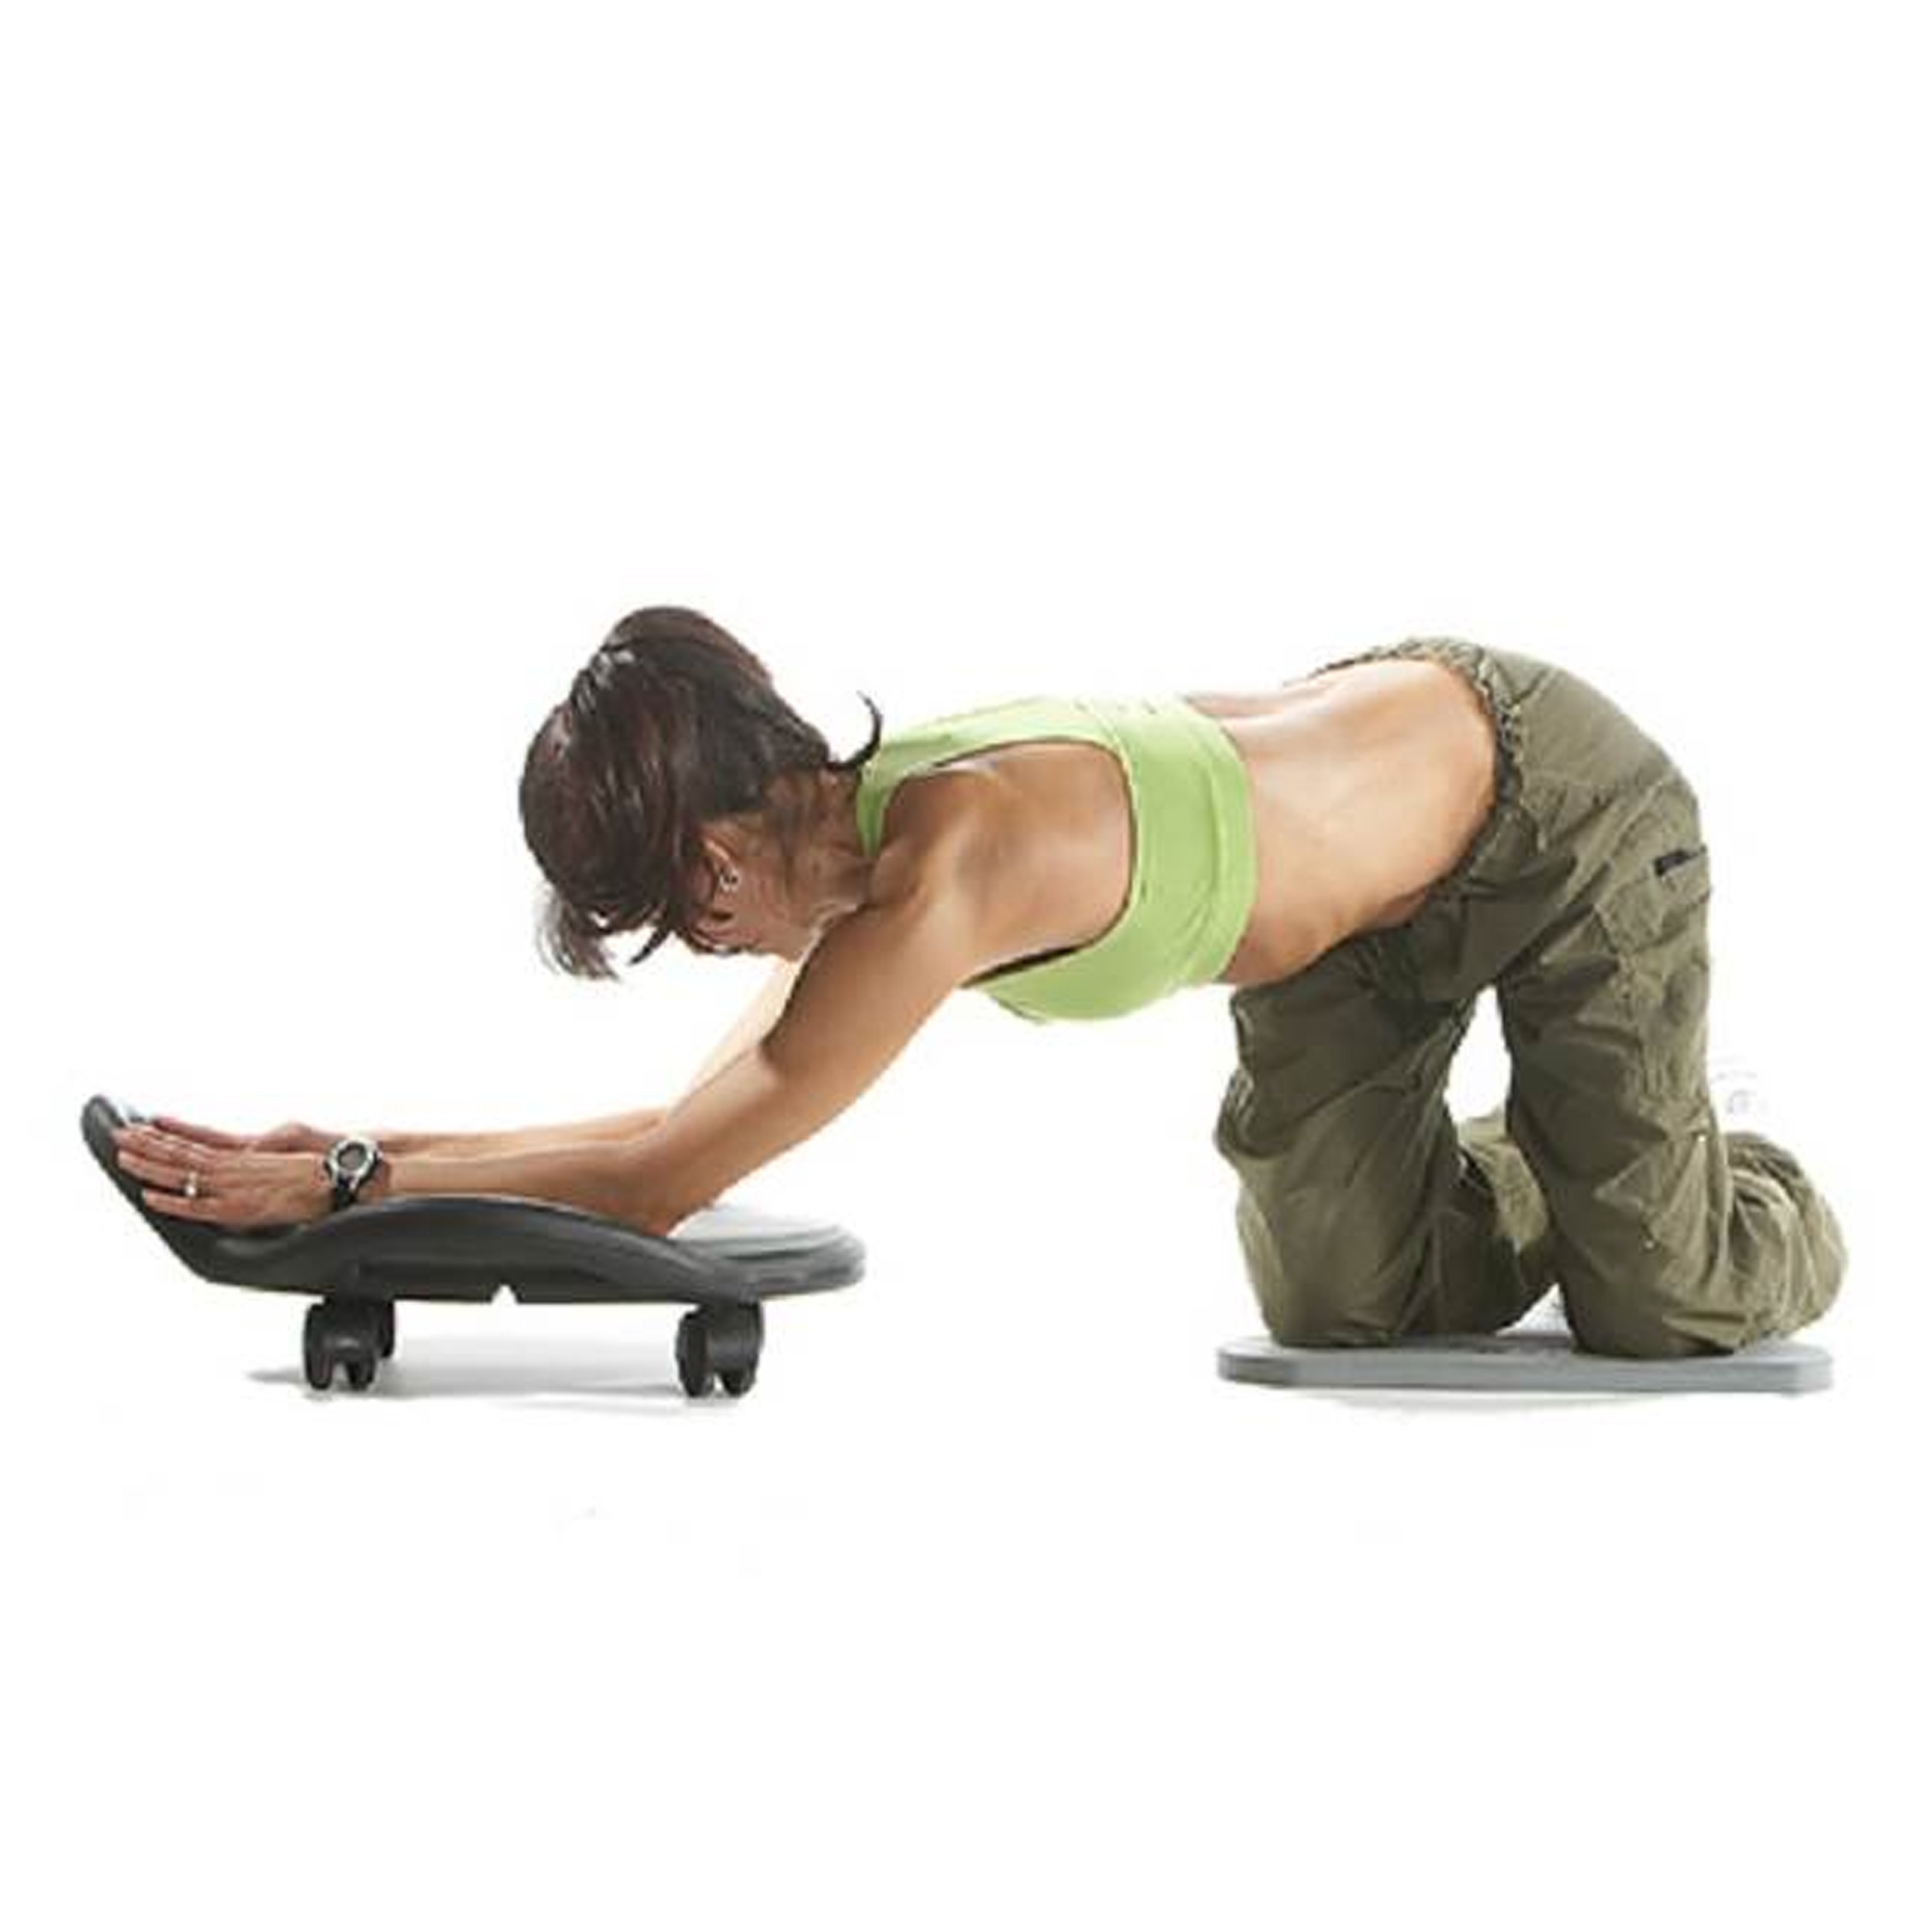 AB Dolly Home Fitness Abdominal Exercise Machine Equipment w/ Workout DVD - image 2 of 4